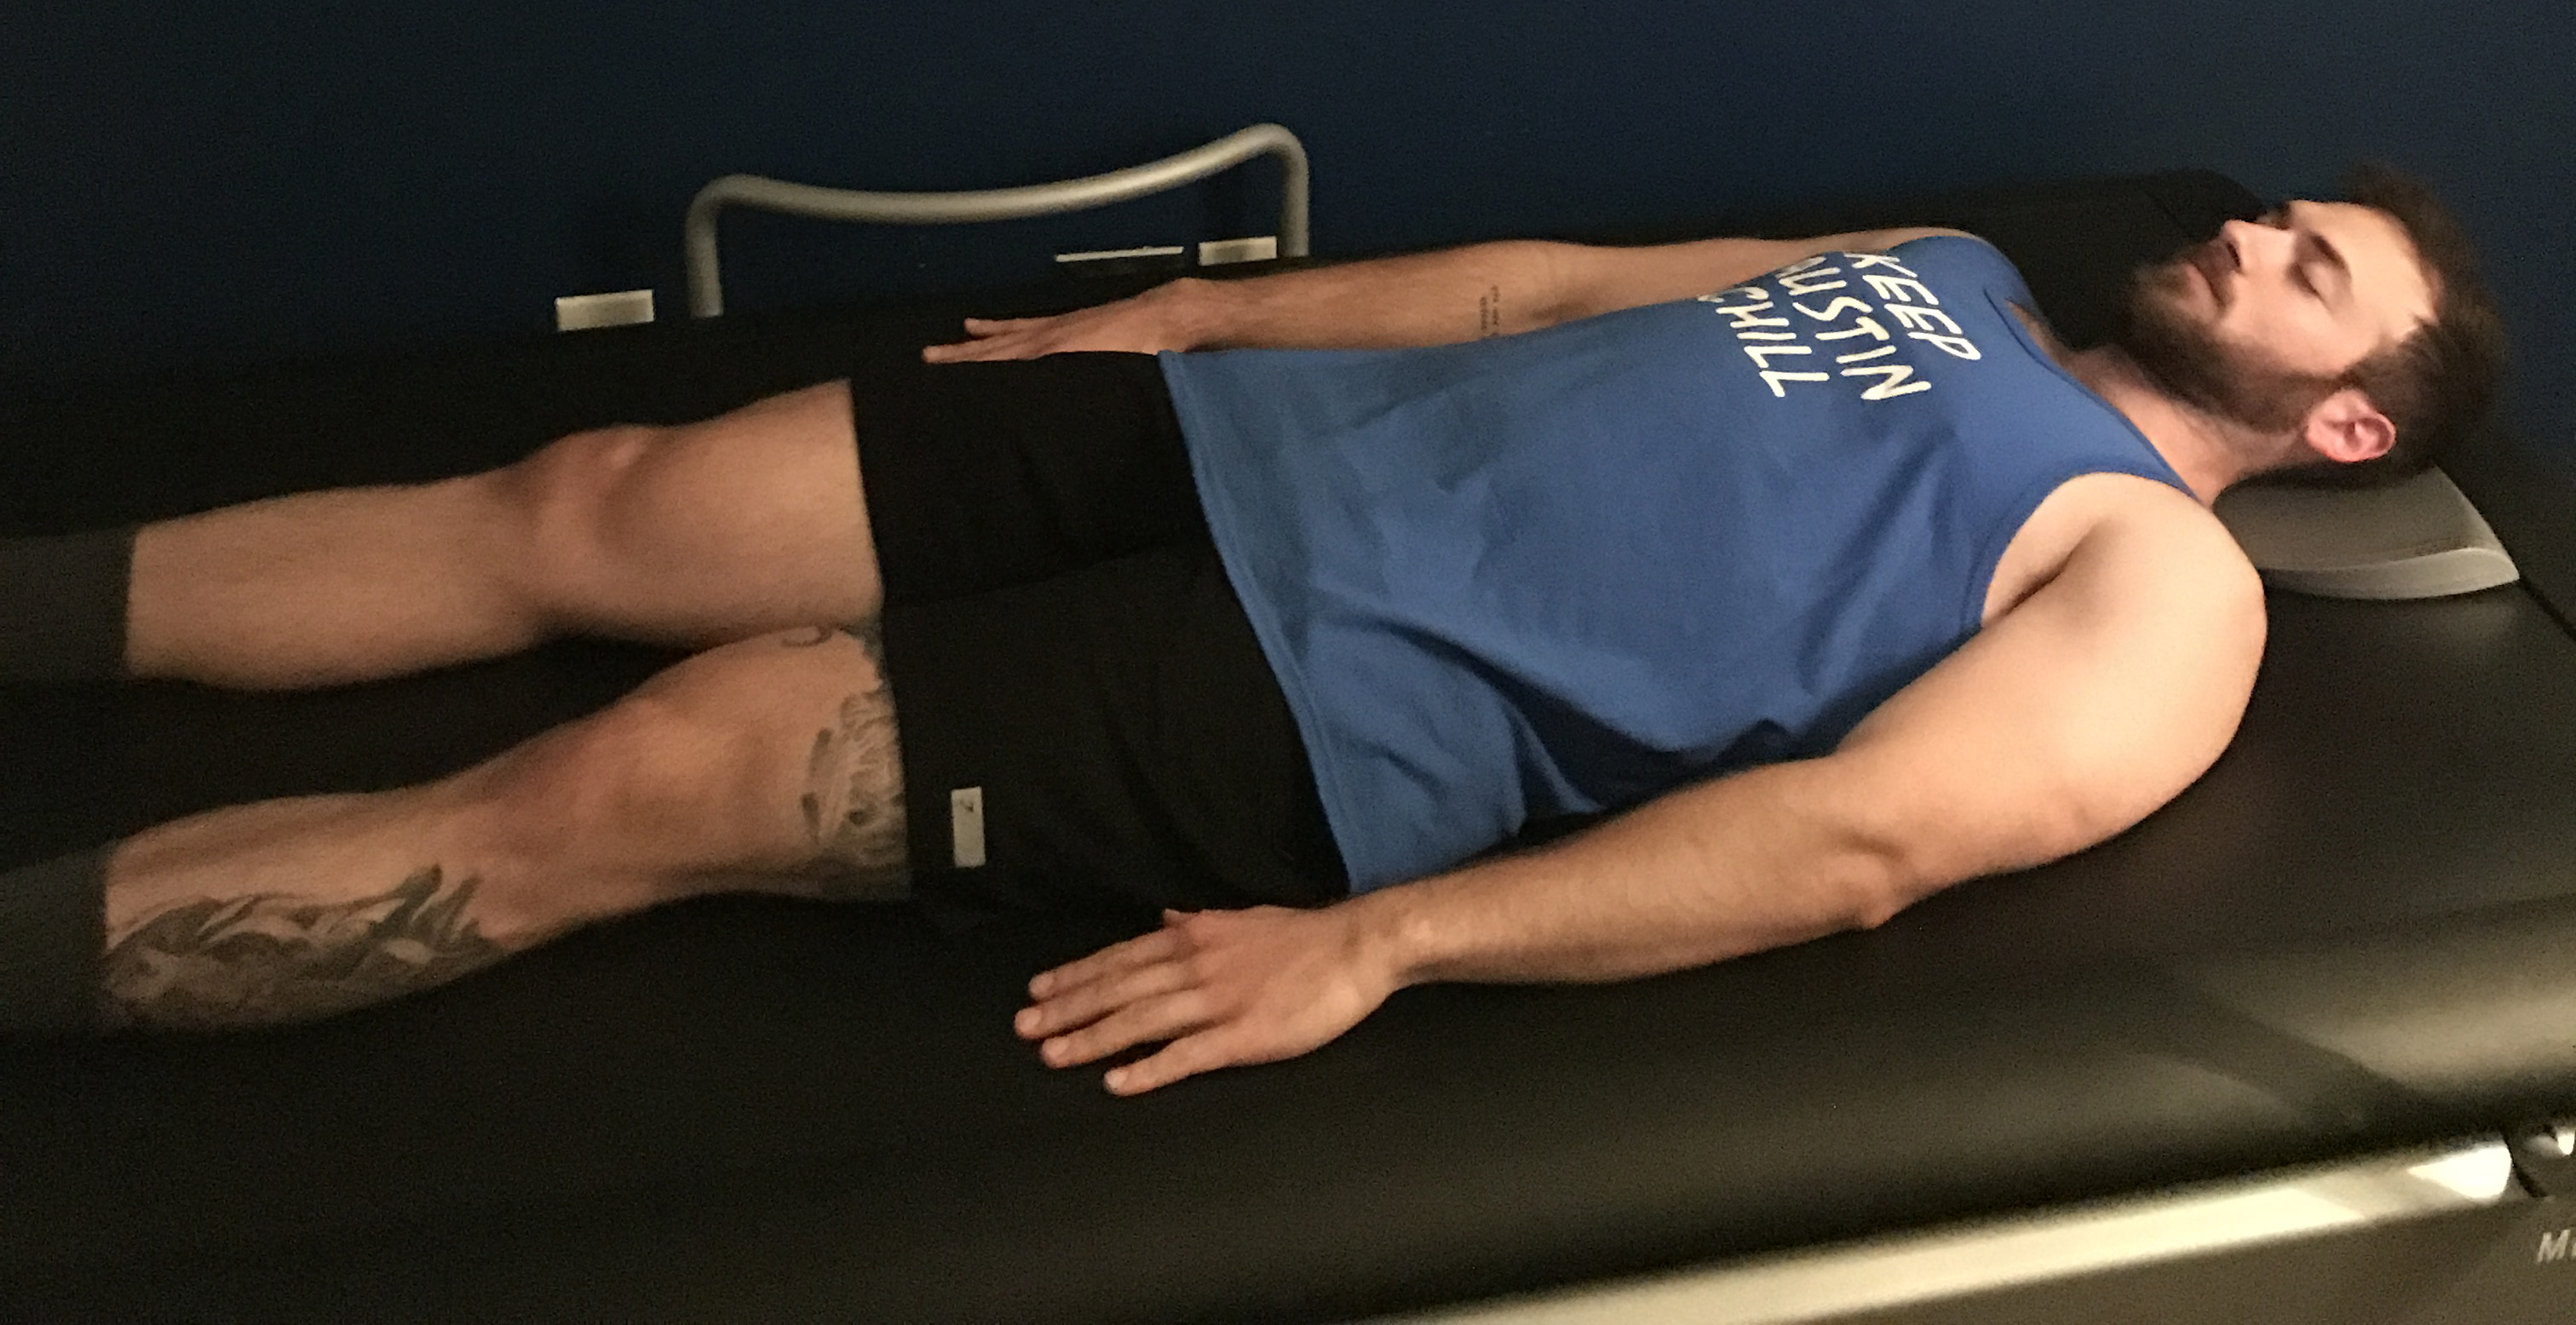 Customer at US Cryo Austin relaxing in the HydroMassage Bed